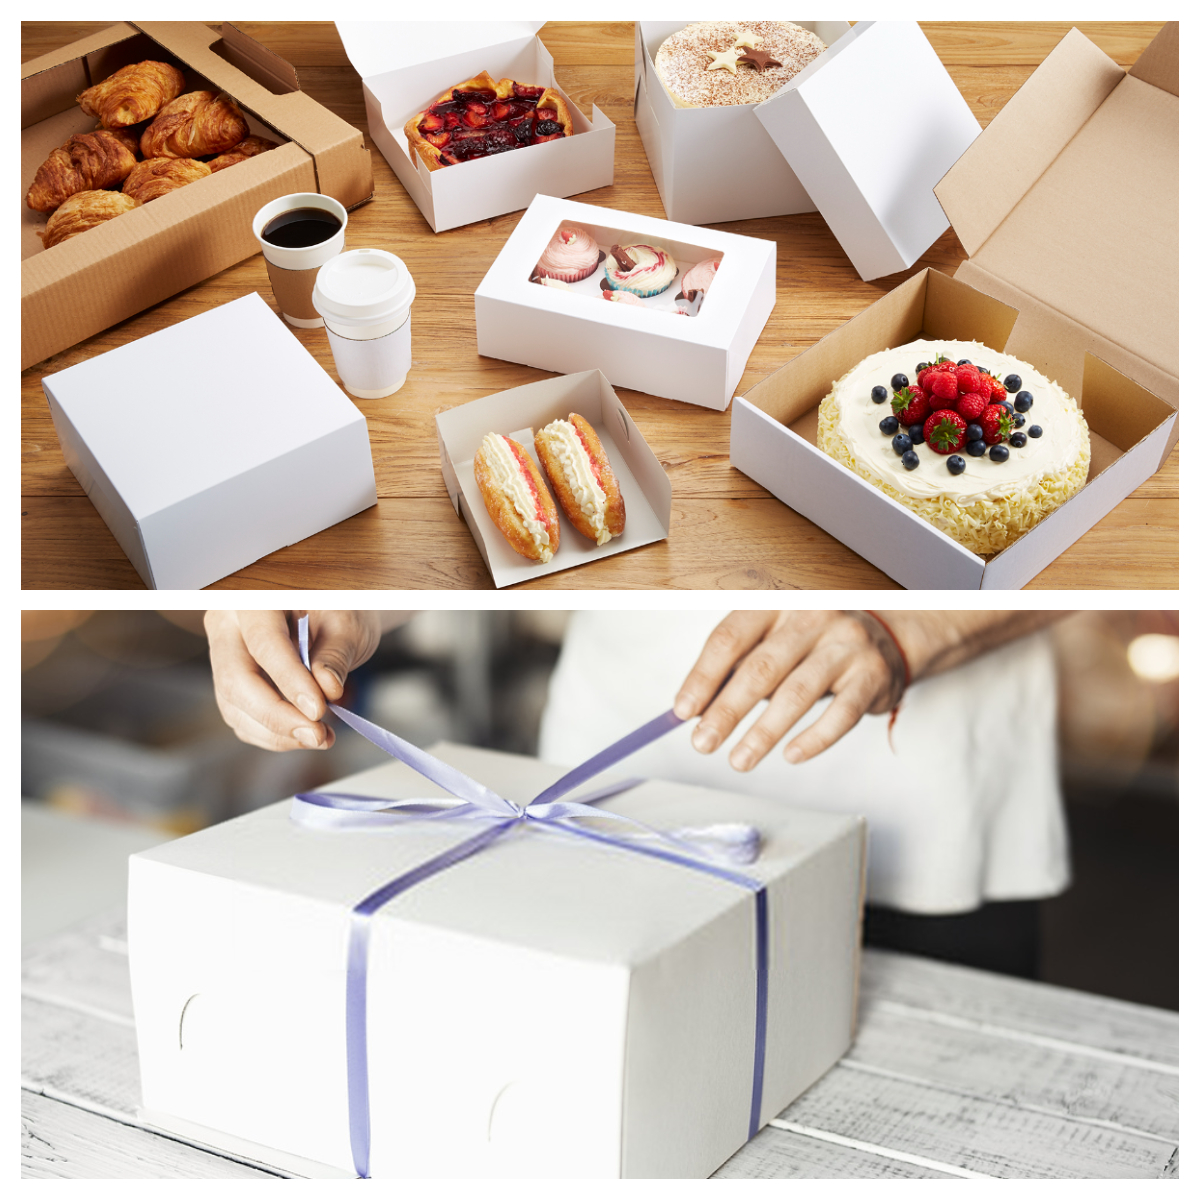 Design Your Custom Bakery Boxes Depending Upon the Item